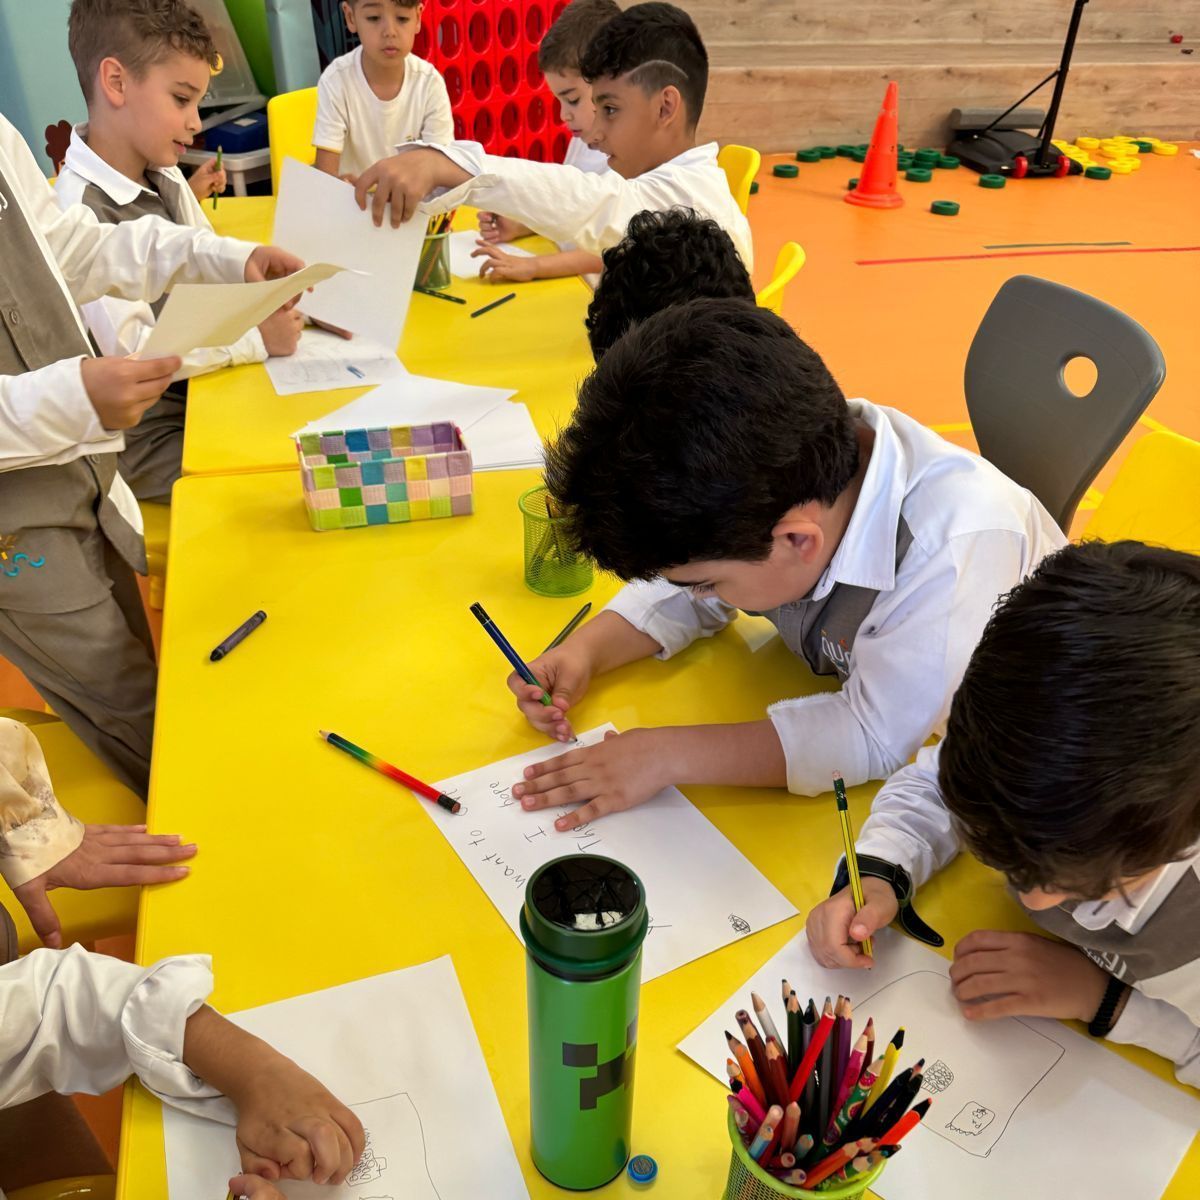 A group of children are sitting at a table with papers and pencils